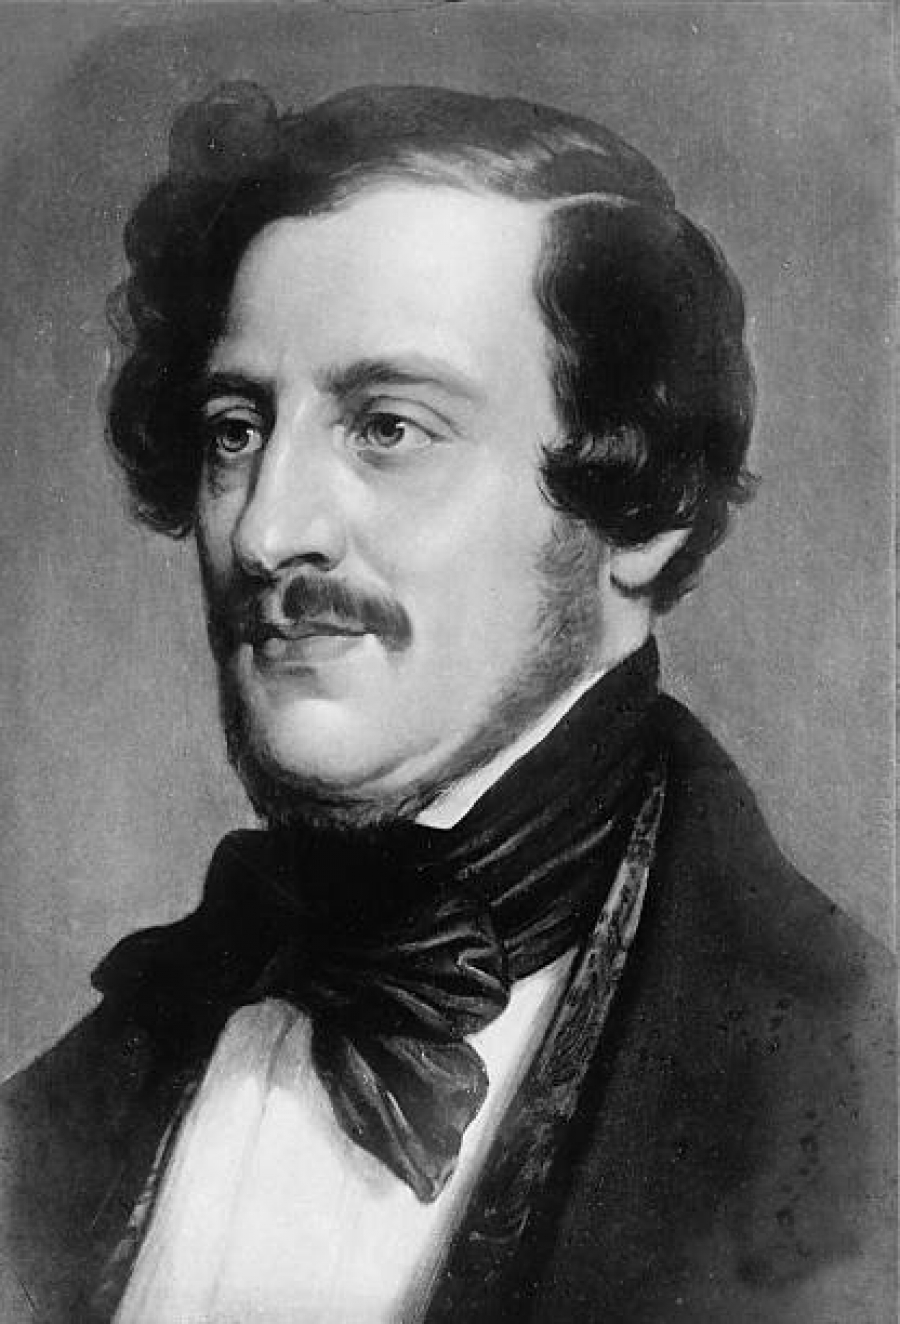 Short composition history of the opera “Don Pasquale” by Gaetano Donizetti